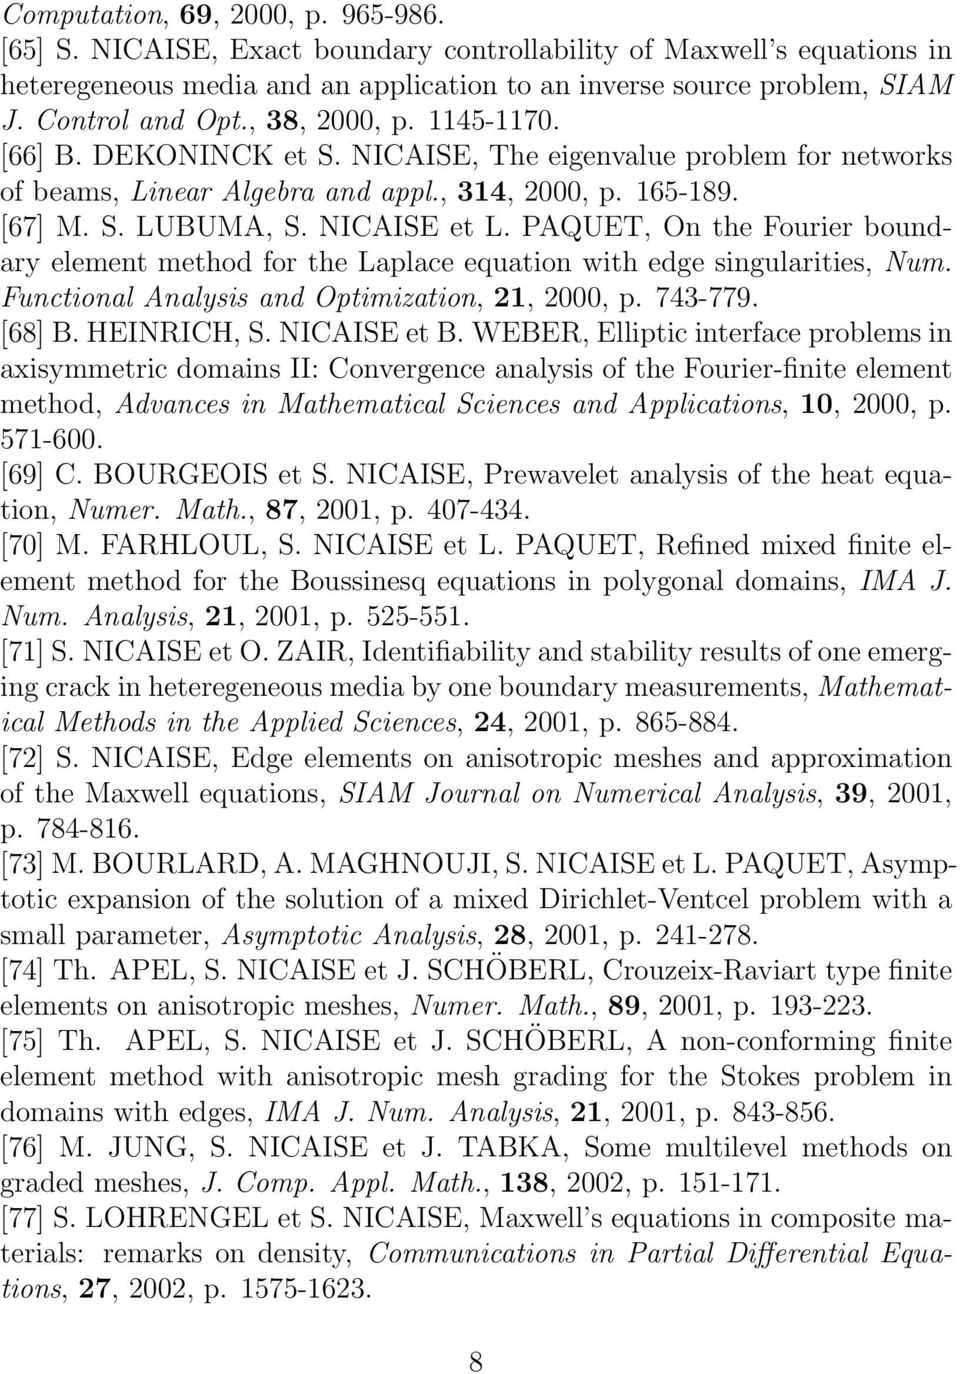 NICAISE et L. PAQUET, On the Fourier boundary element method for the Laplace equation with edge singularities, Num. Functional Analysis and Optimization, 21, 2000, p. 743-779. [68] B. HEINRICH, S.